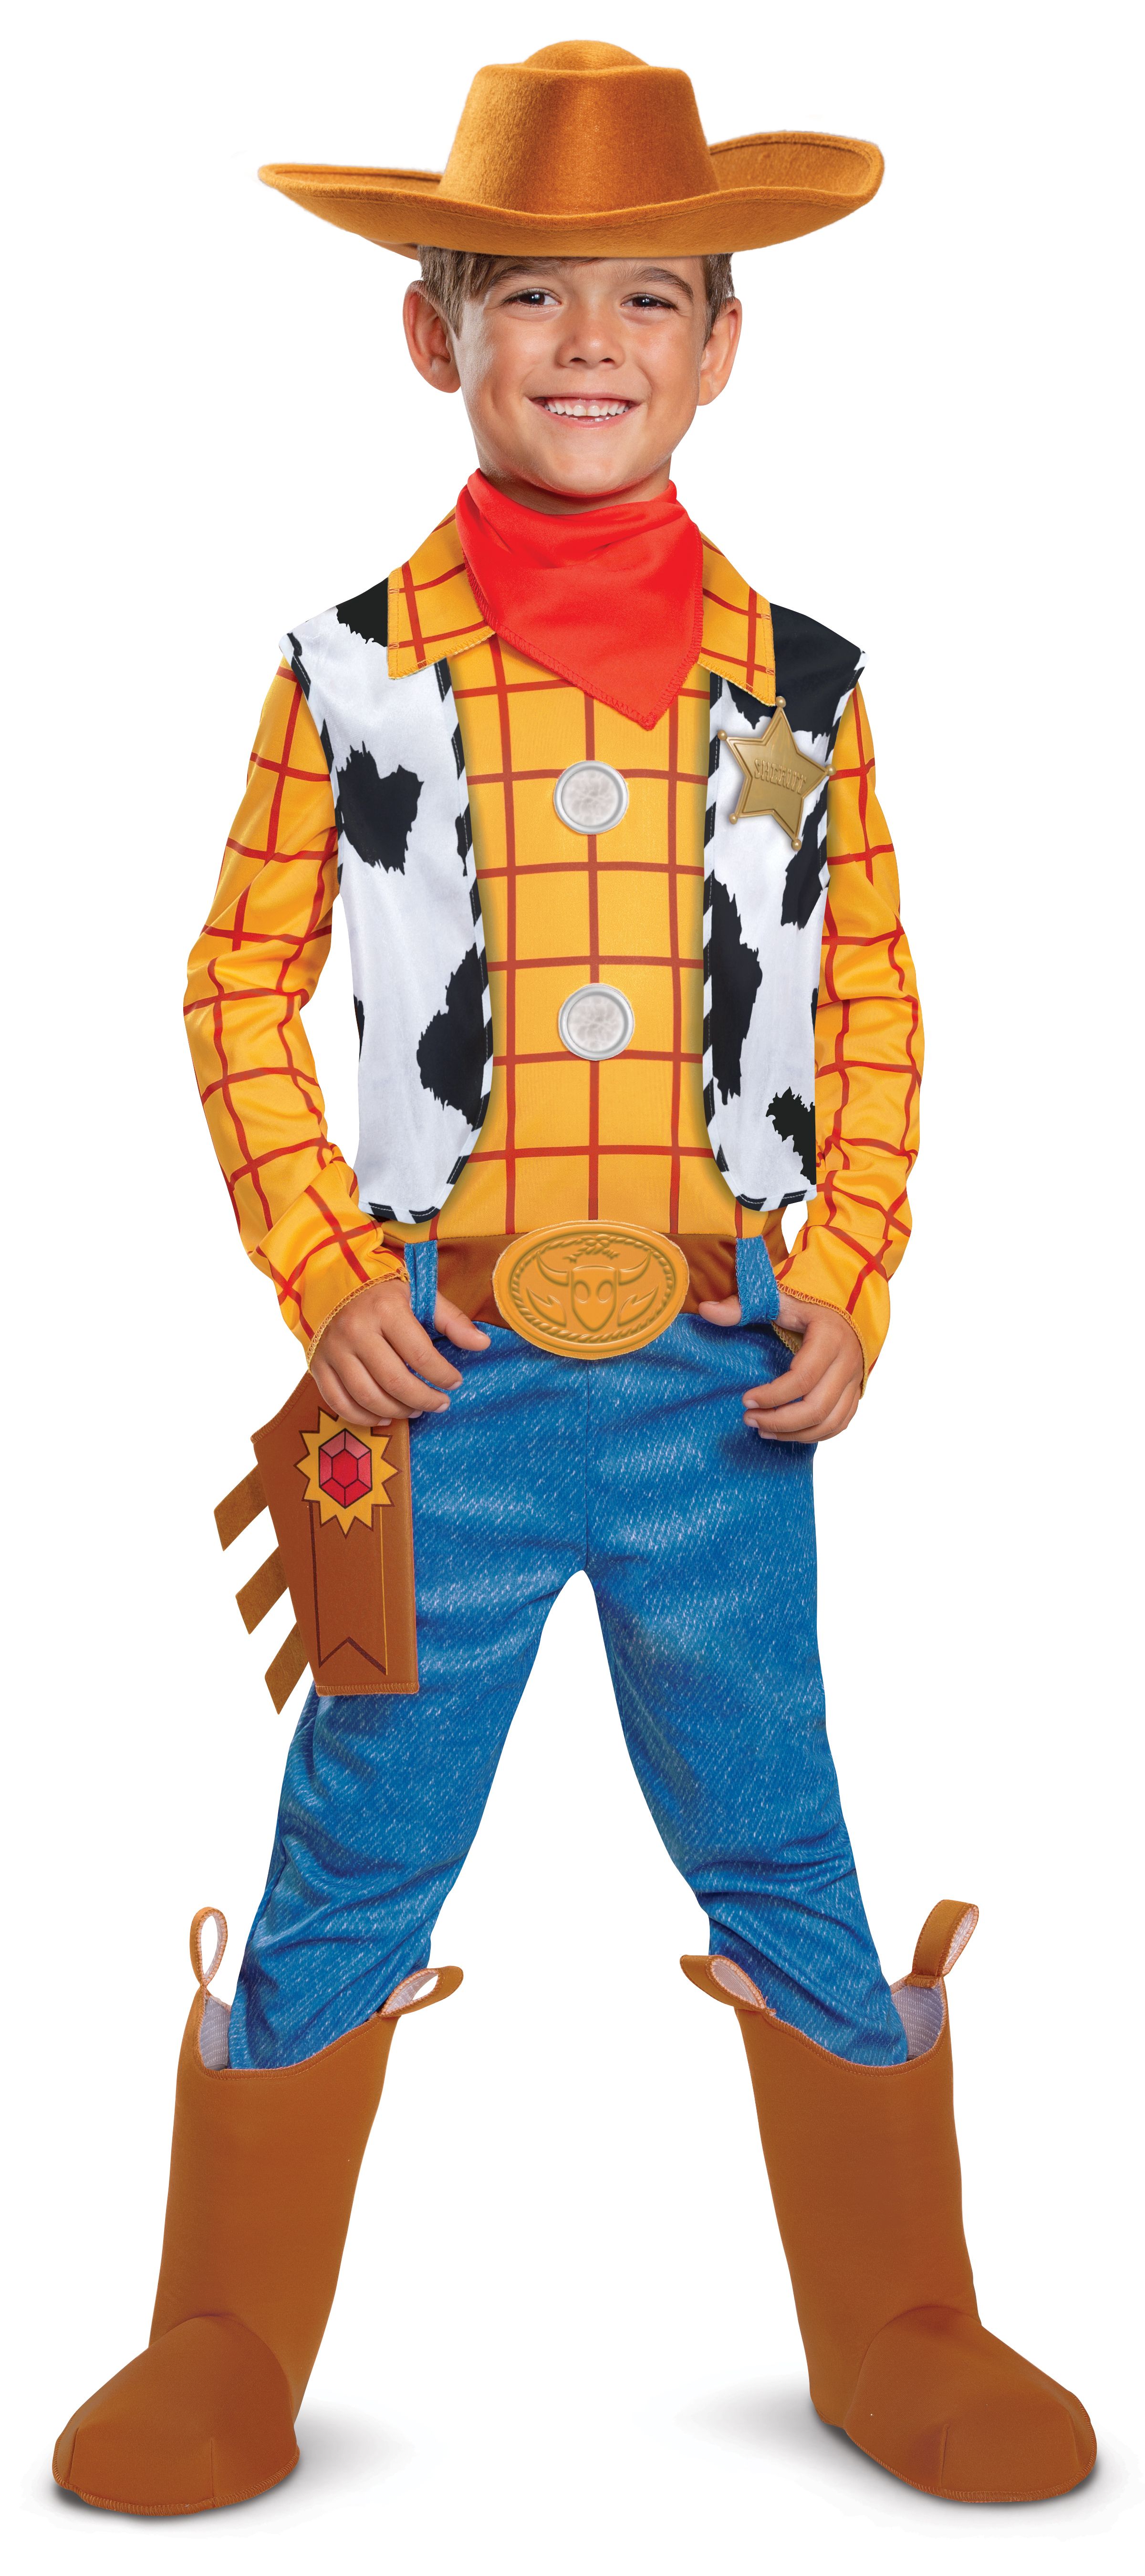 Disguise Toy Story 4 Boys Classic Woody Halloween Costume - image 1 of 9